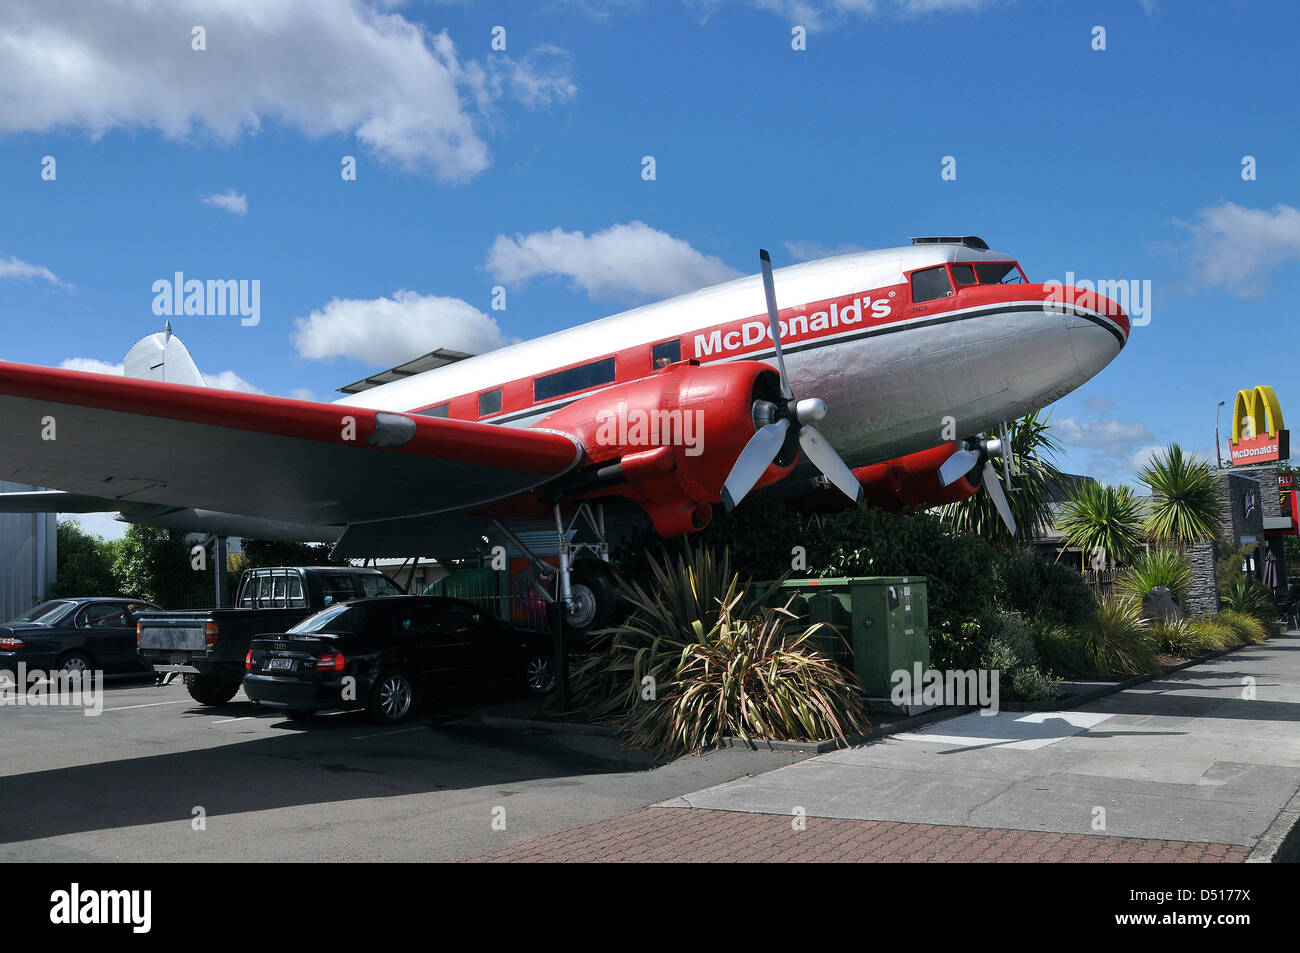 McDonald's plane. A Douglas DC-3 Dakota airplane converted for use as part of the McDonald's restaurant at Taupo, New Zealand. Serial ZK-CAW Stock Photo